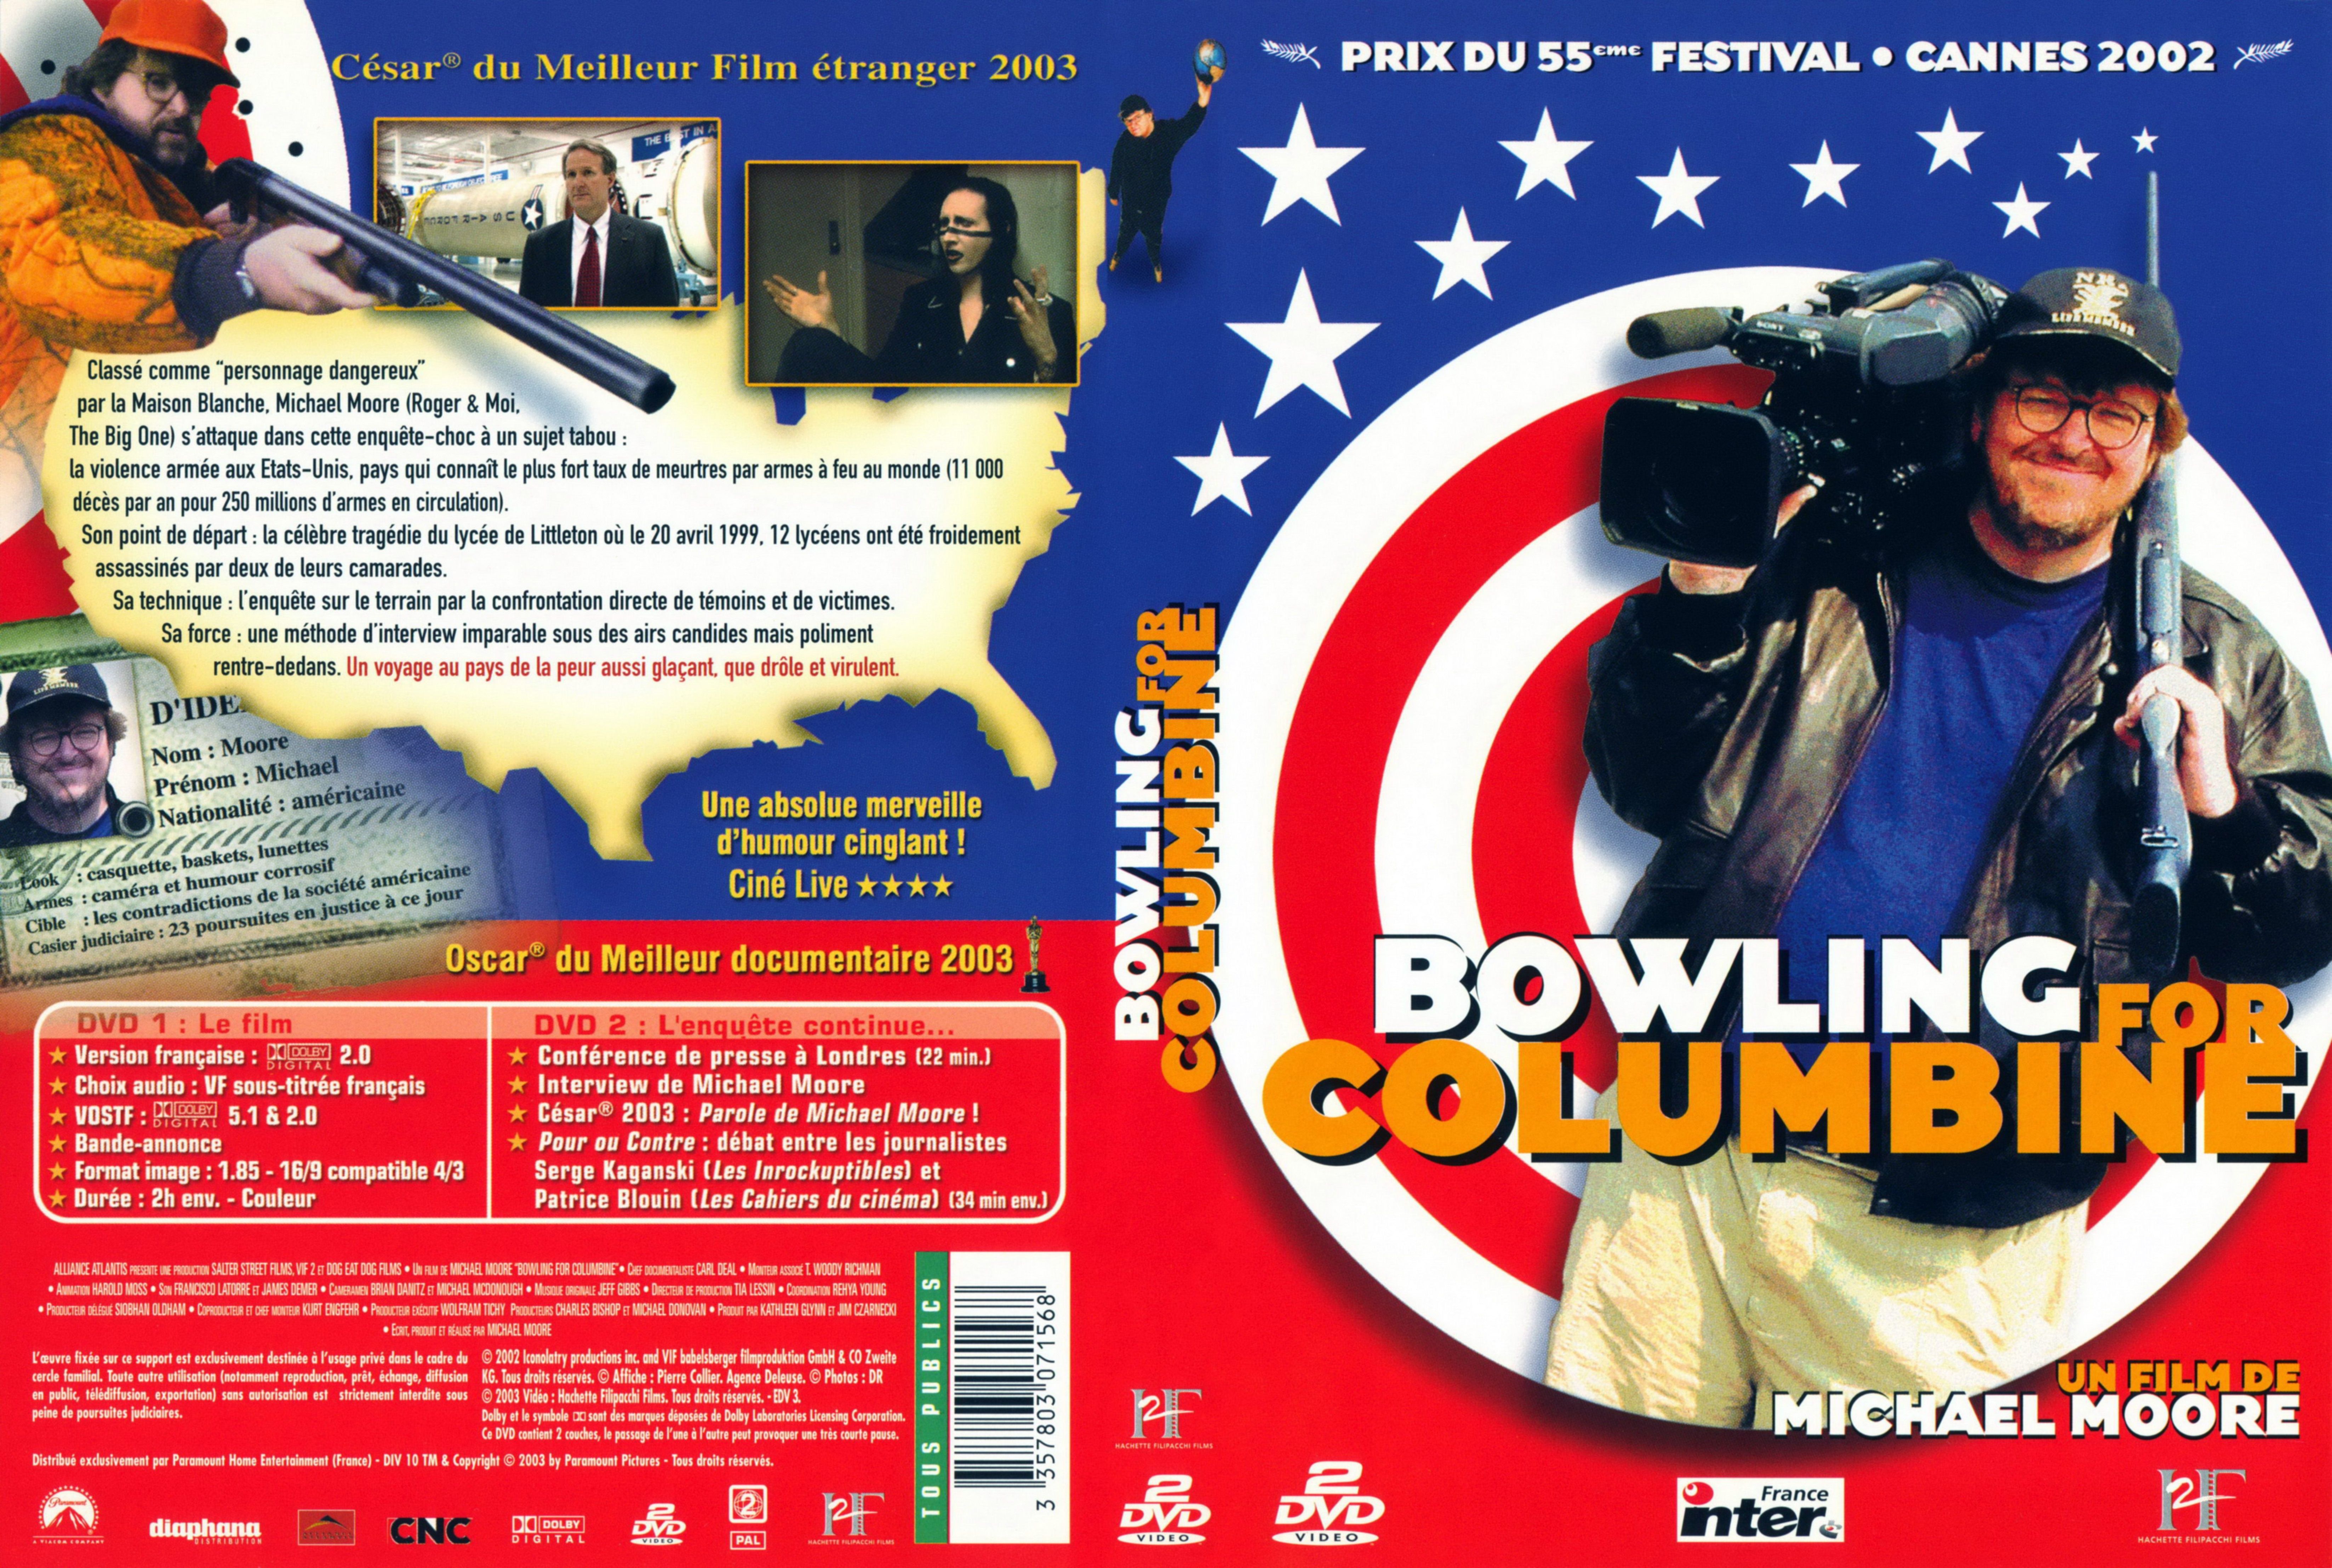 Jaquette DVD Bowling for columbine v2